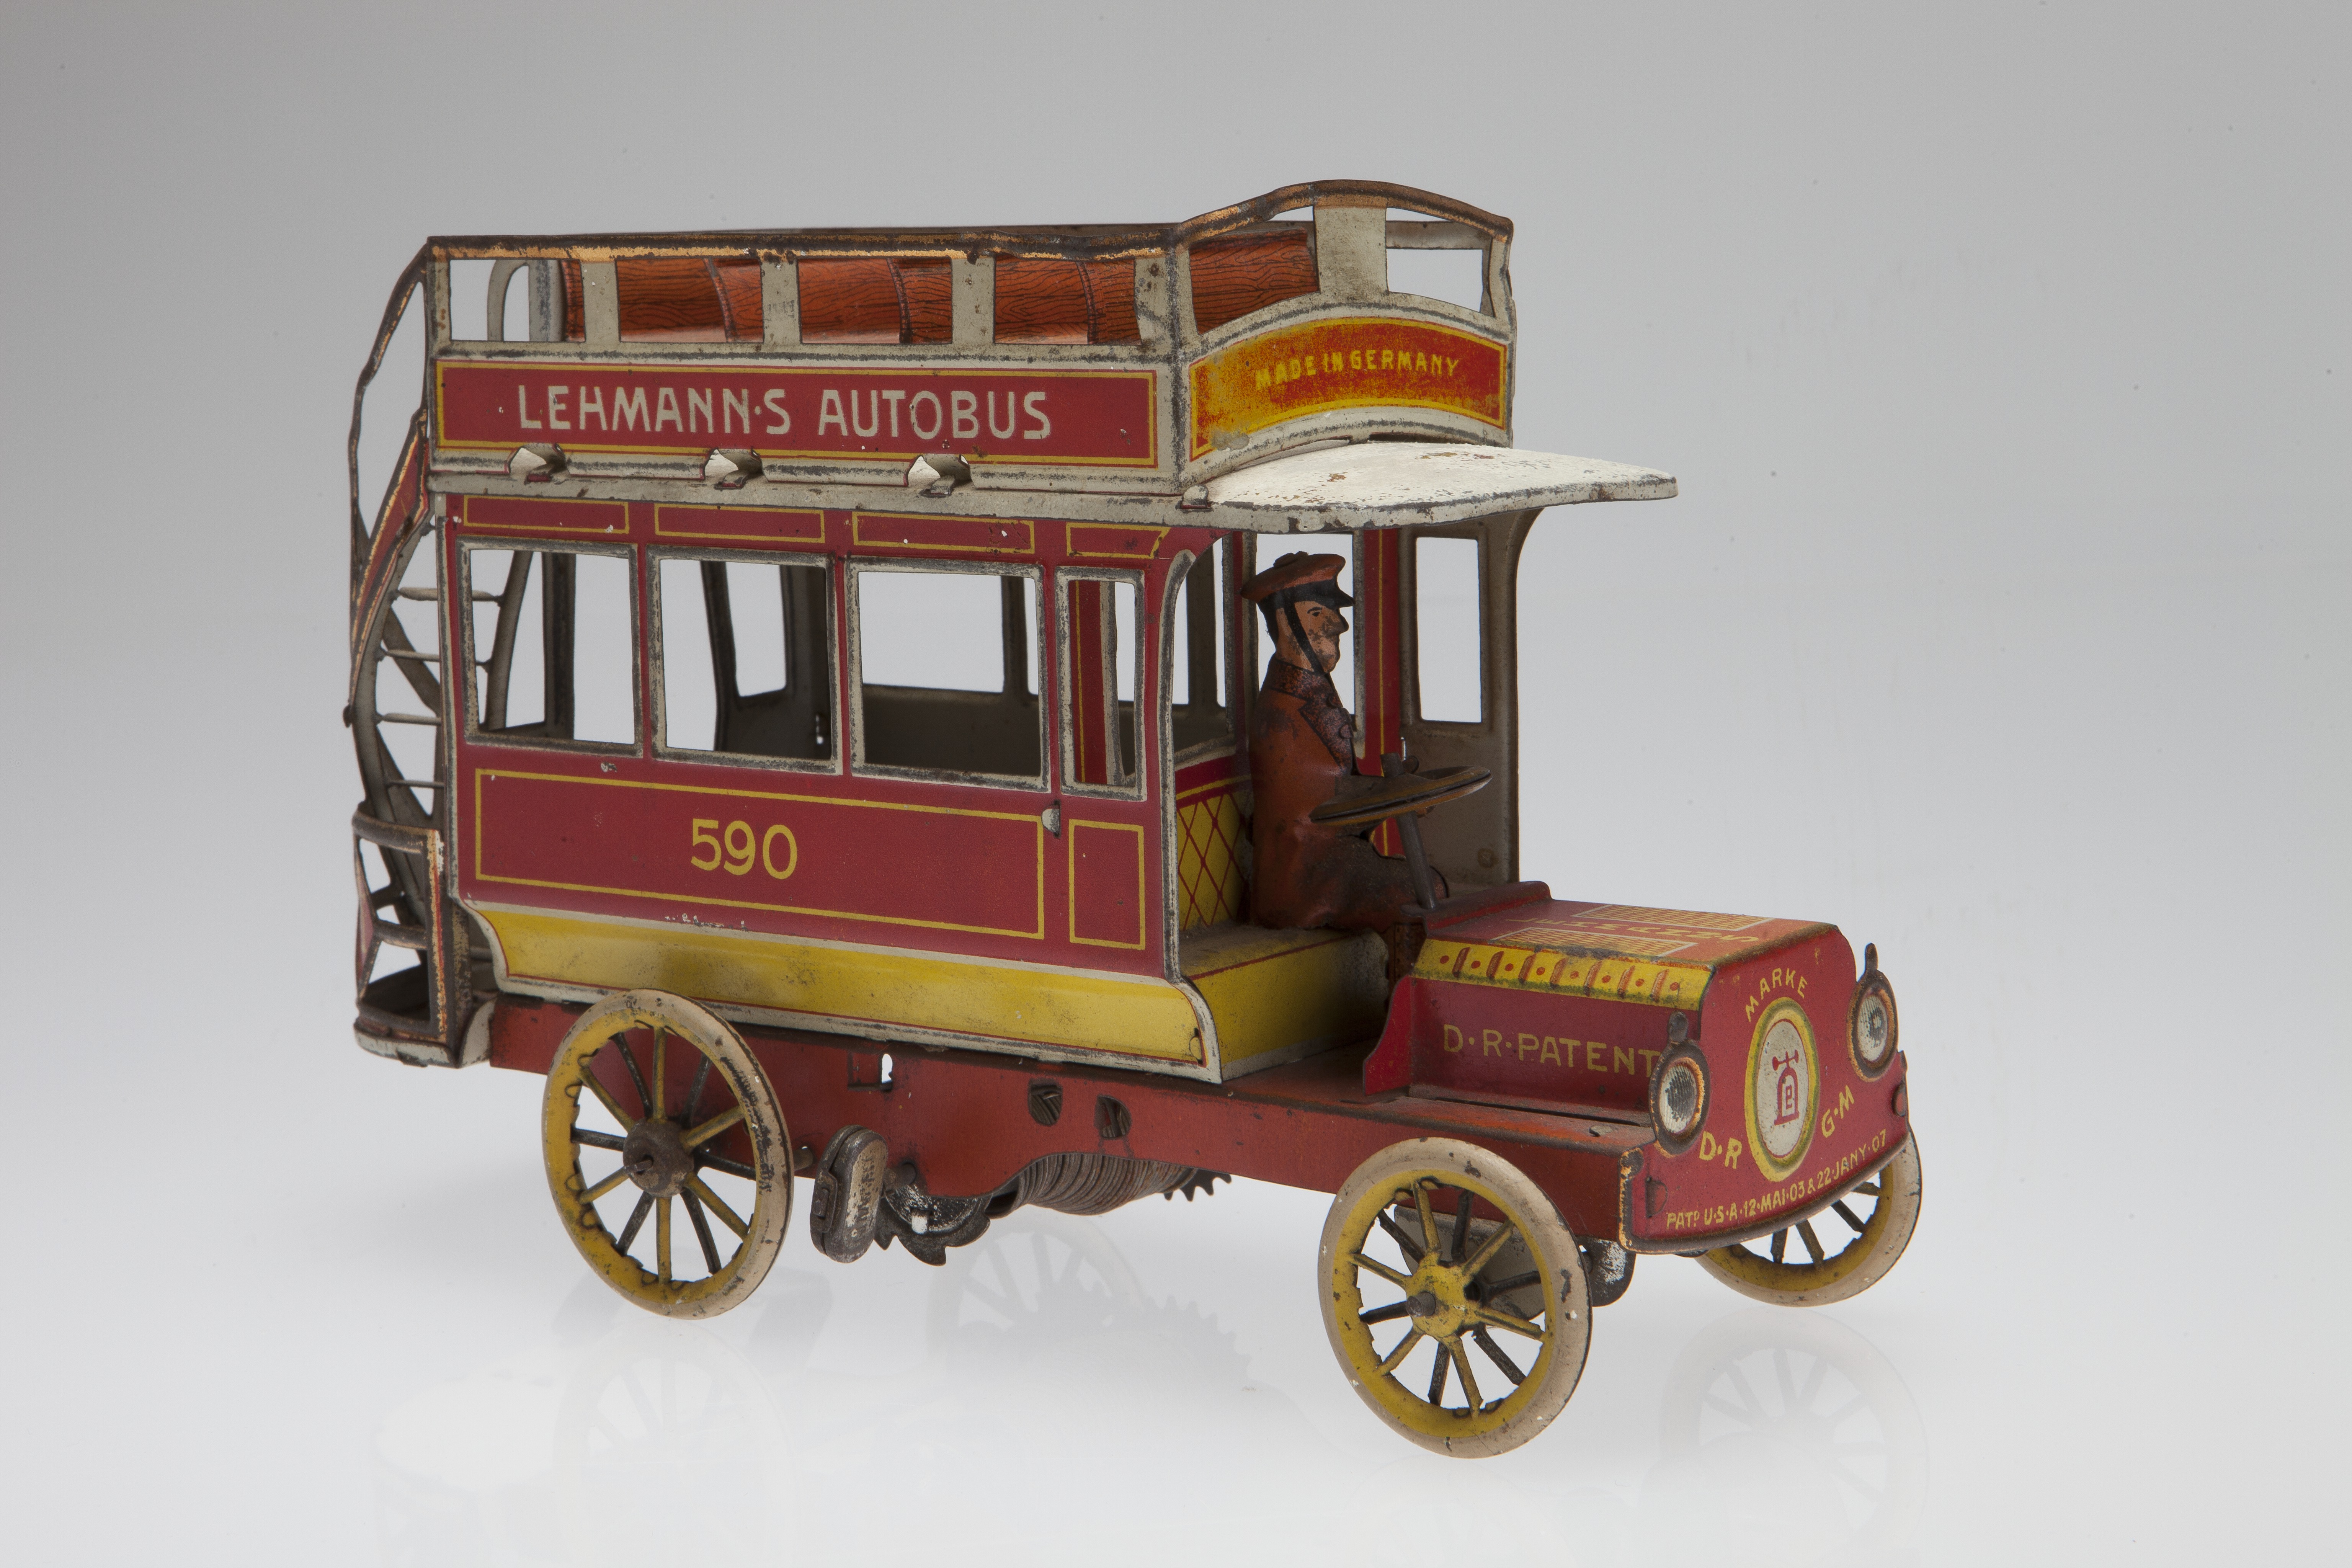 Lithographed tin mechanical toy double decker bus produced by the Lehmann Company in Germany, c. 1907-1915.jpg